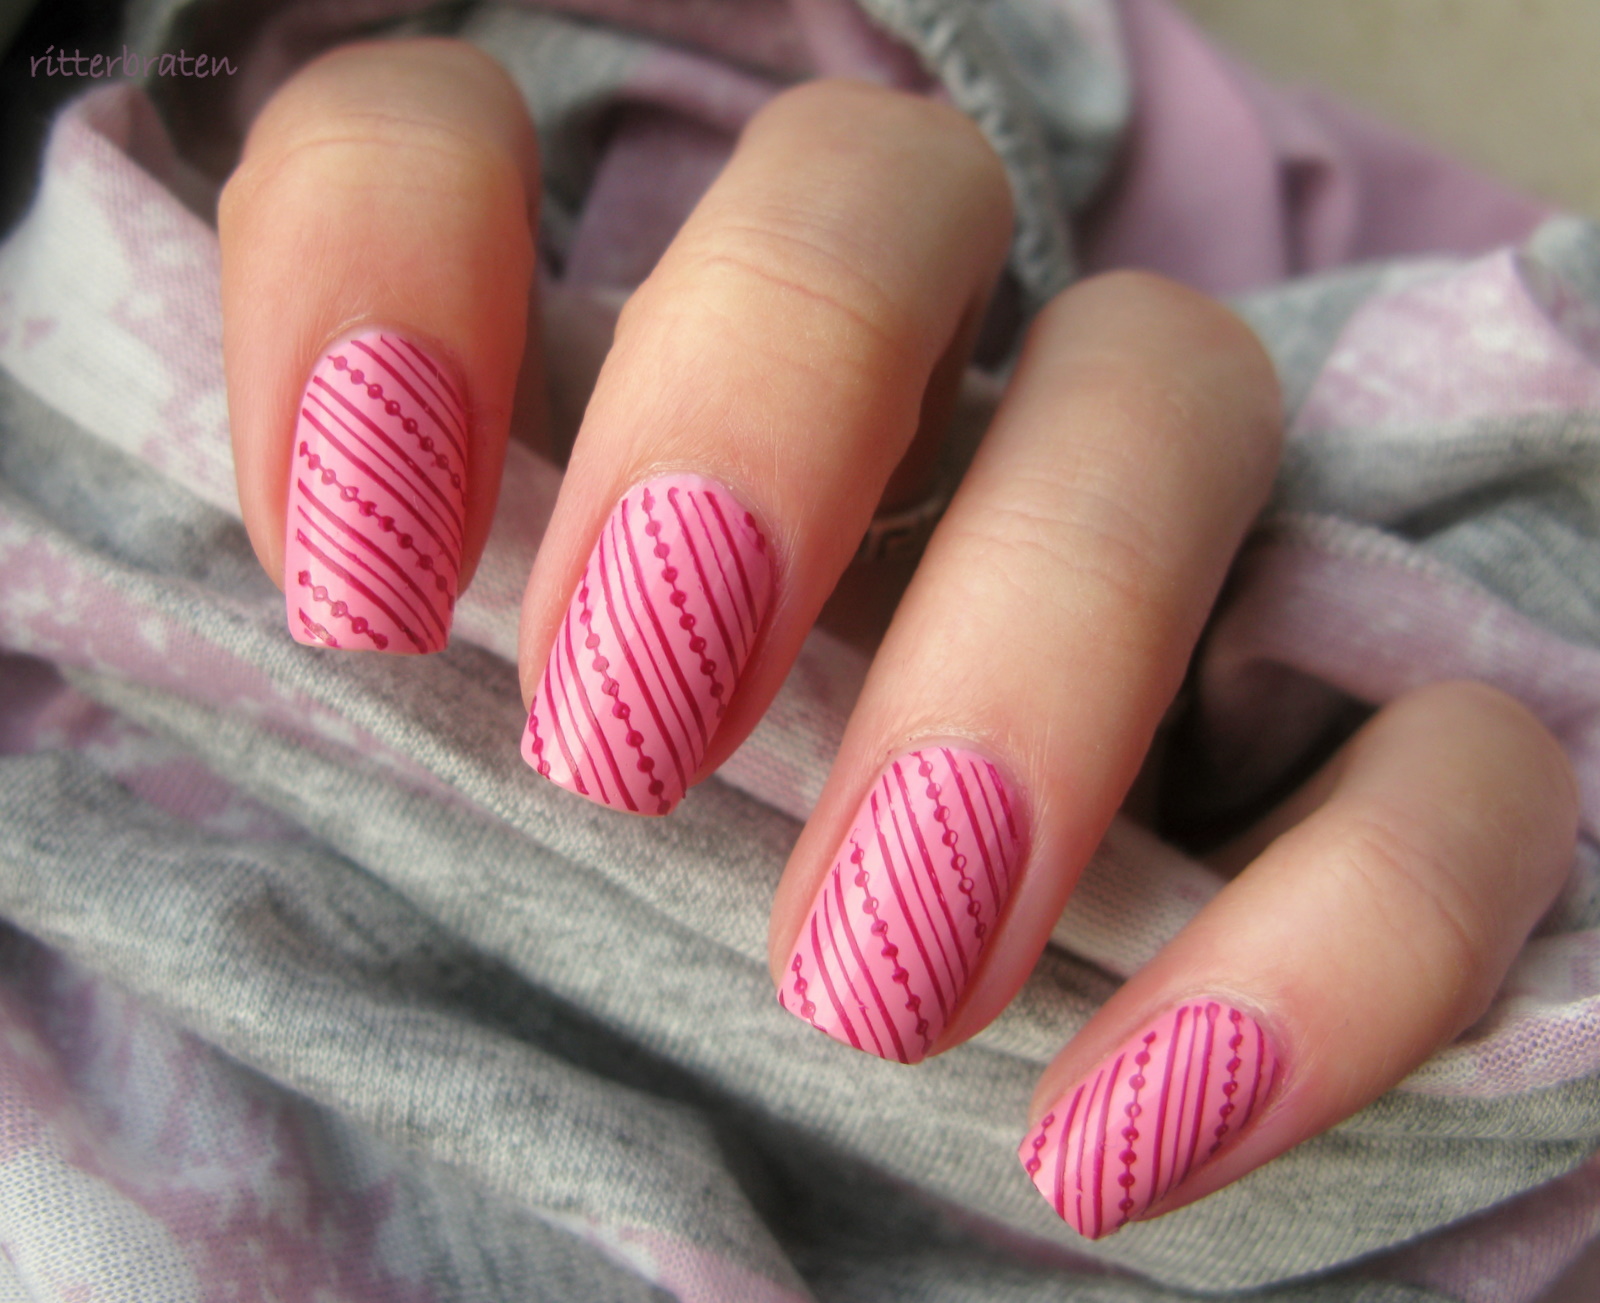 5. Paper Nail Art: The Latest Trend in Nail Design - wide 1